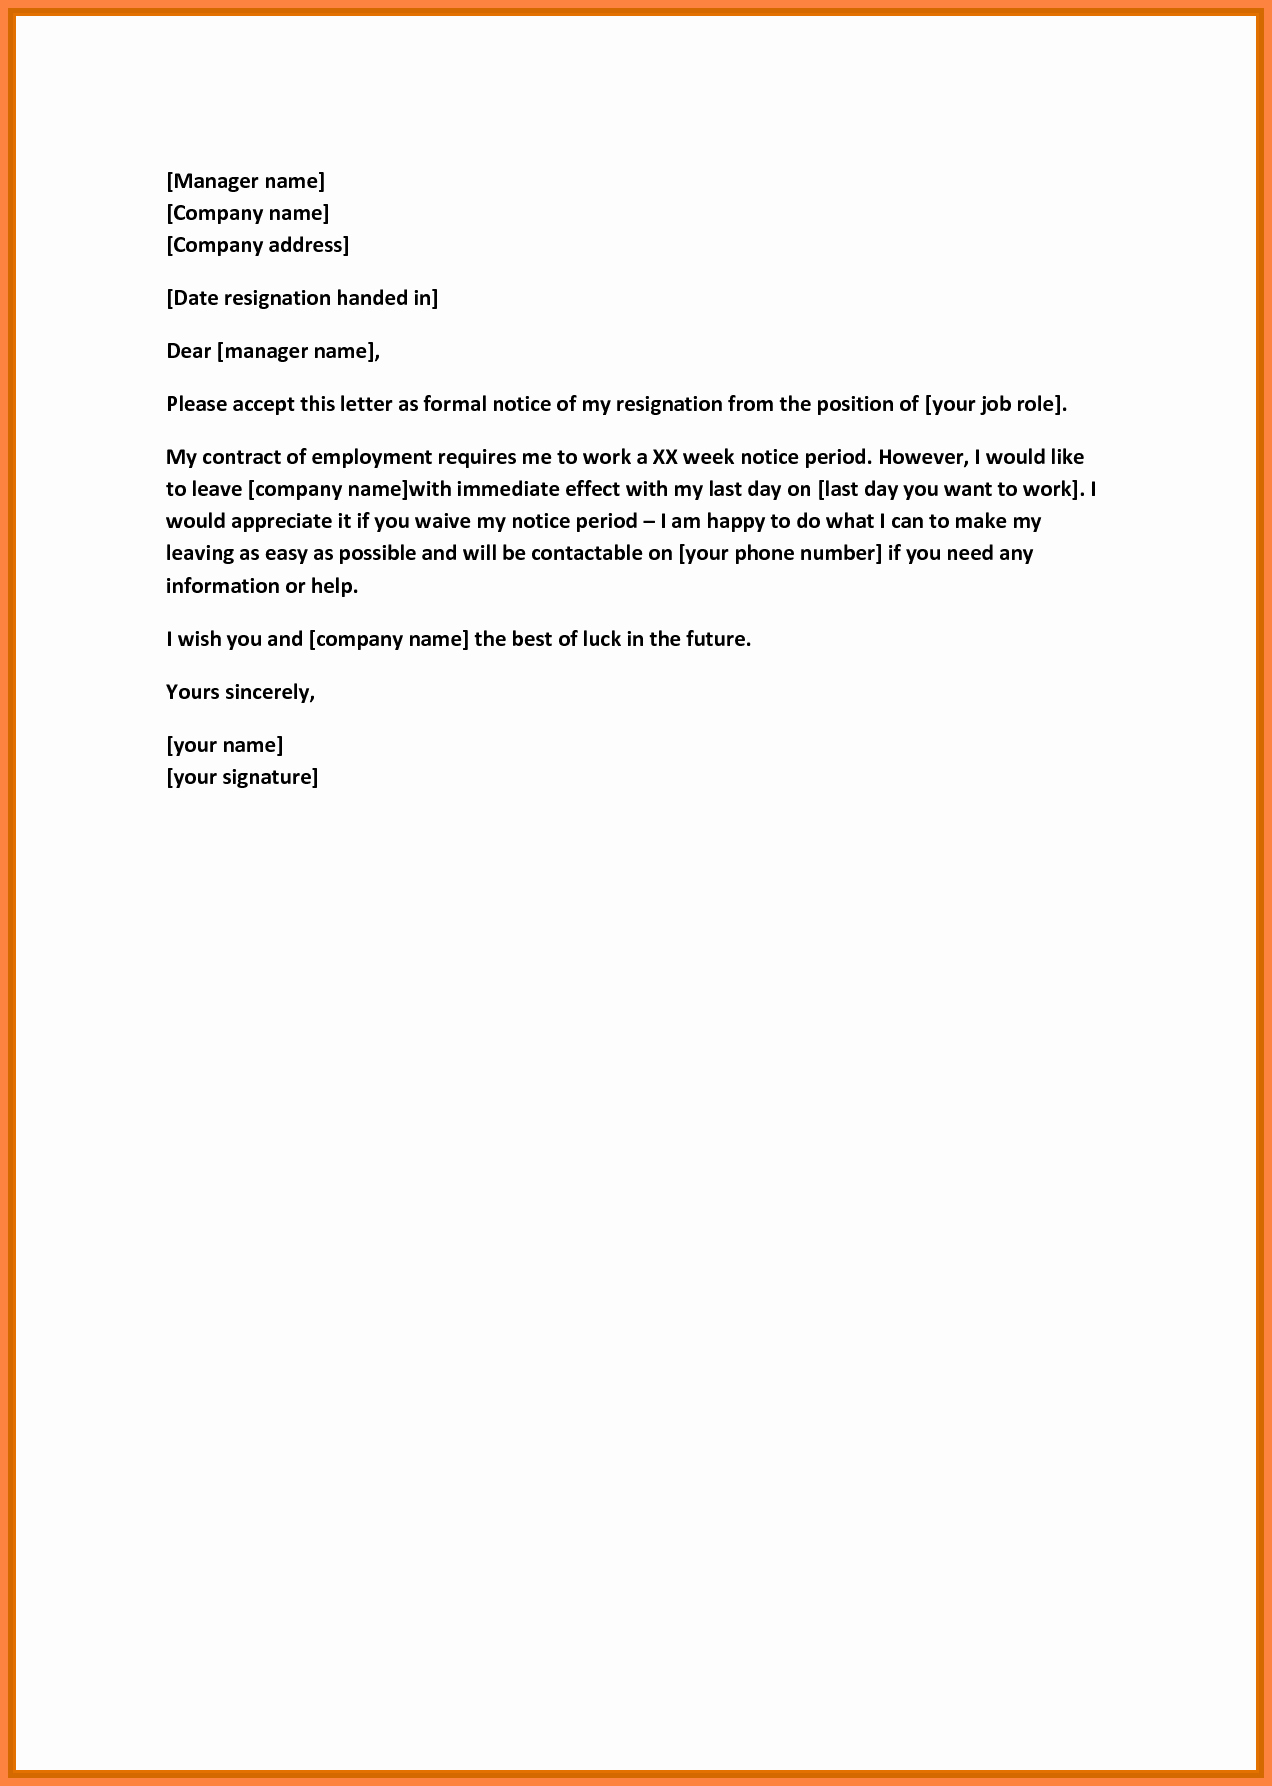 30 Days Notice Example New 7 Resignation Letter 30 Days Notice Period Sample